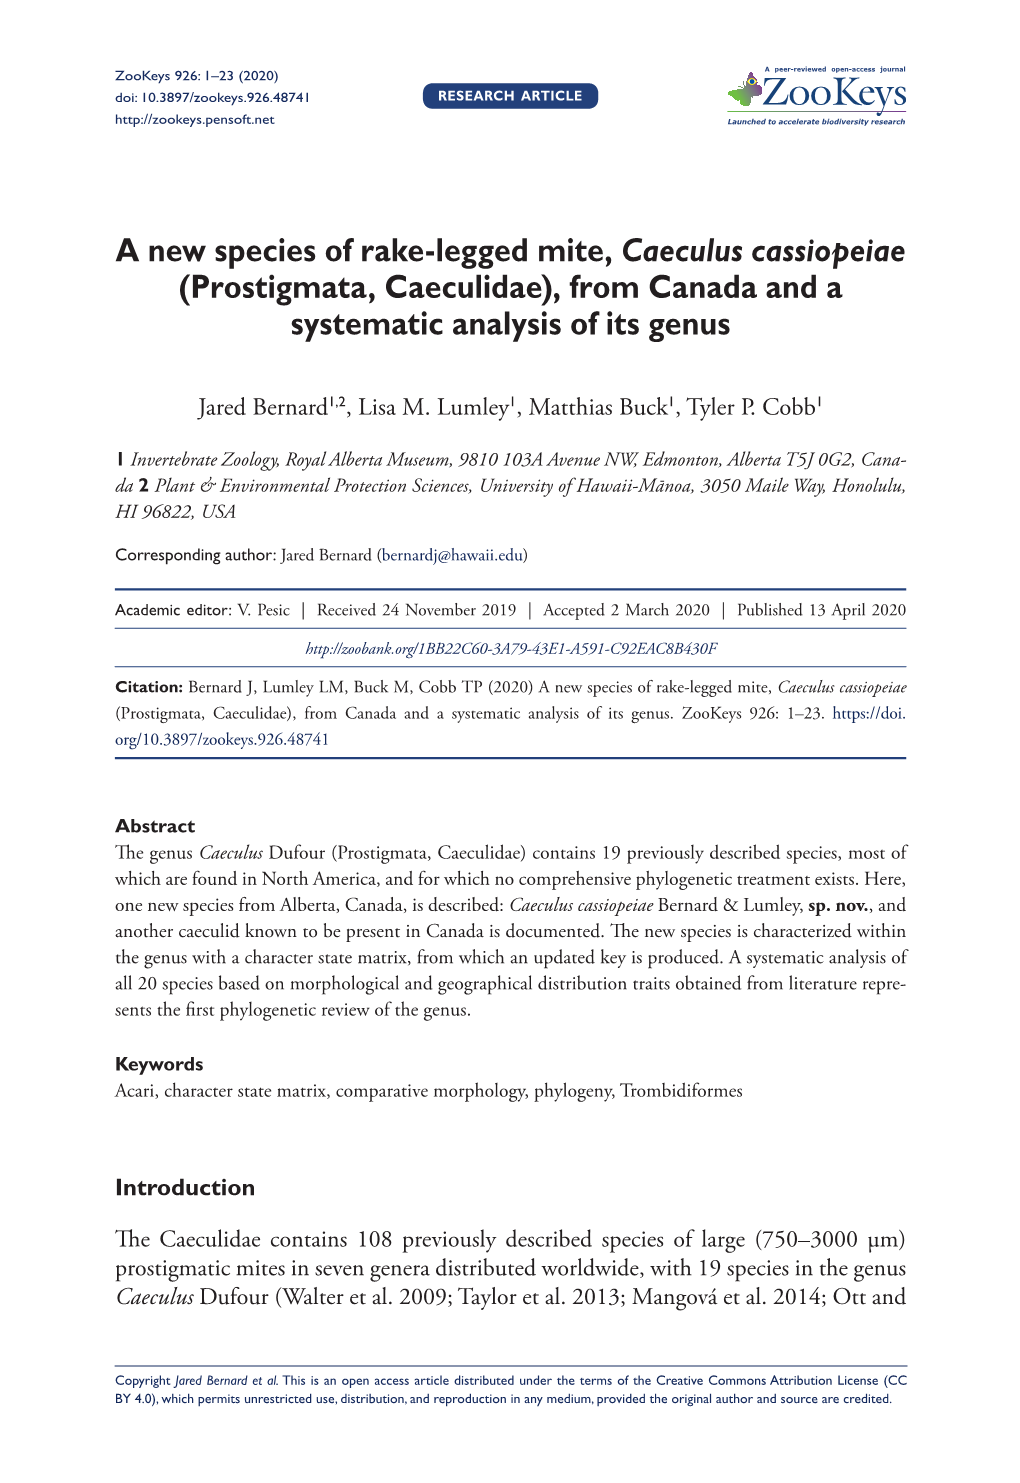 A New Species of Rake-Legged Mite, Caeculus Cassiopeiae (Prostigmata, Caeculidae), from Canada and a Systematic Analysis of Its Genus